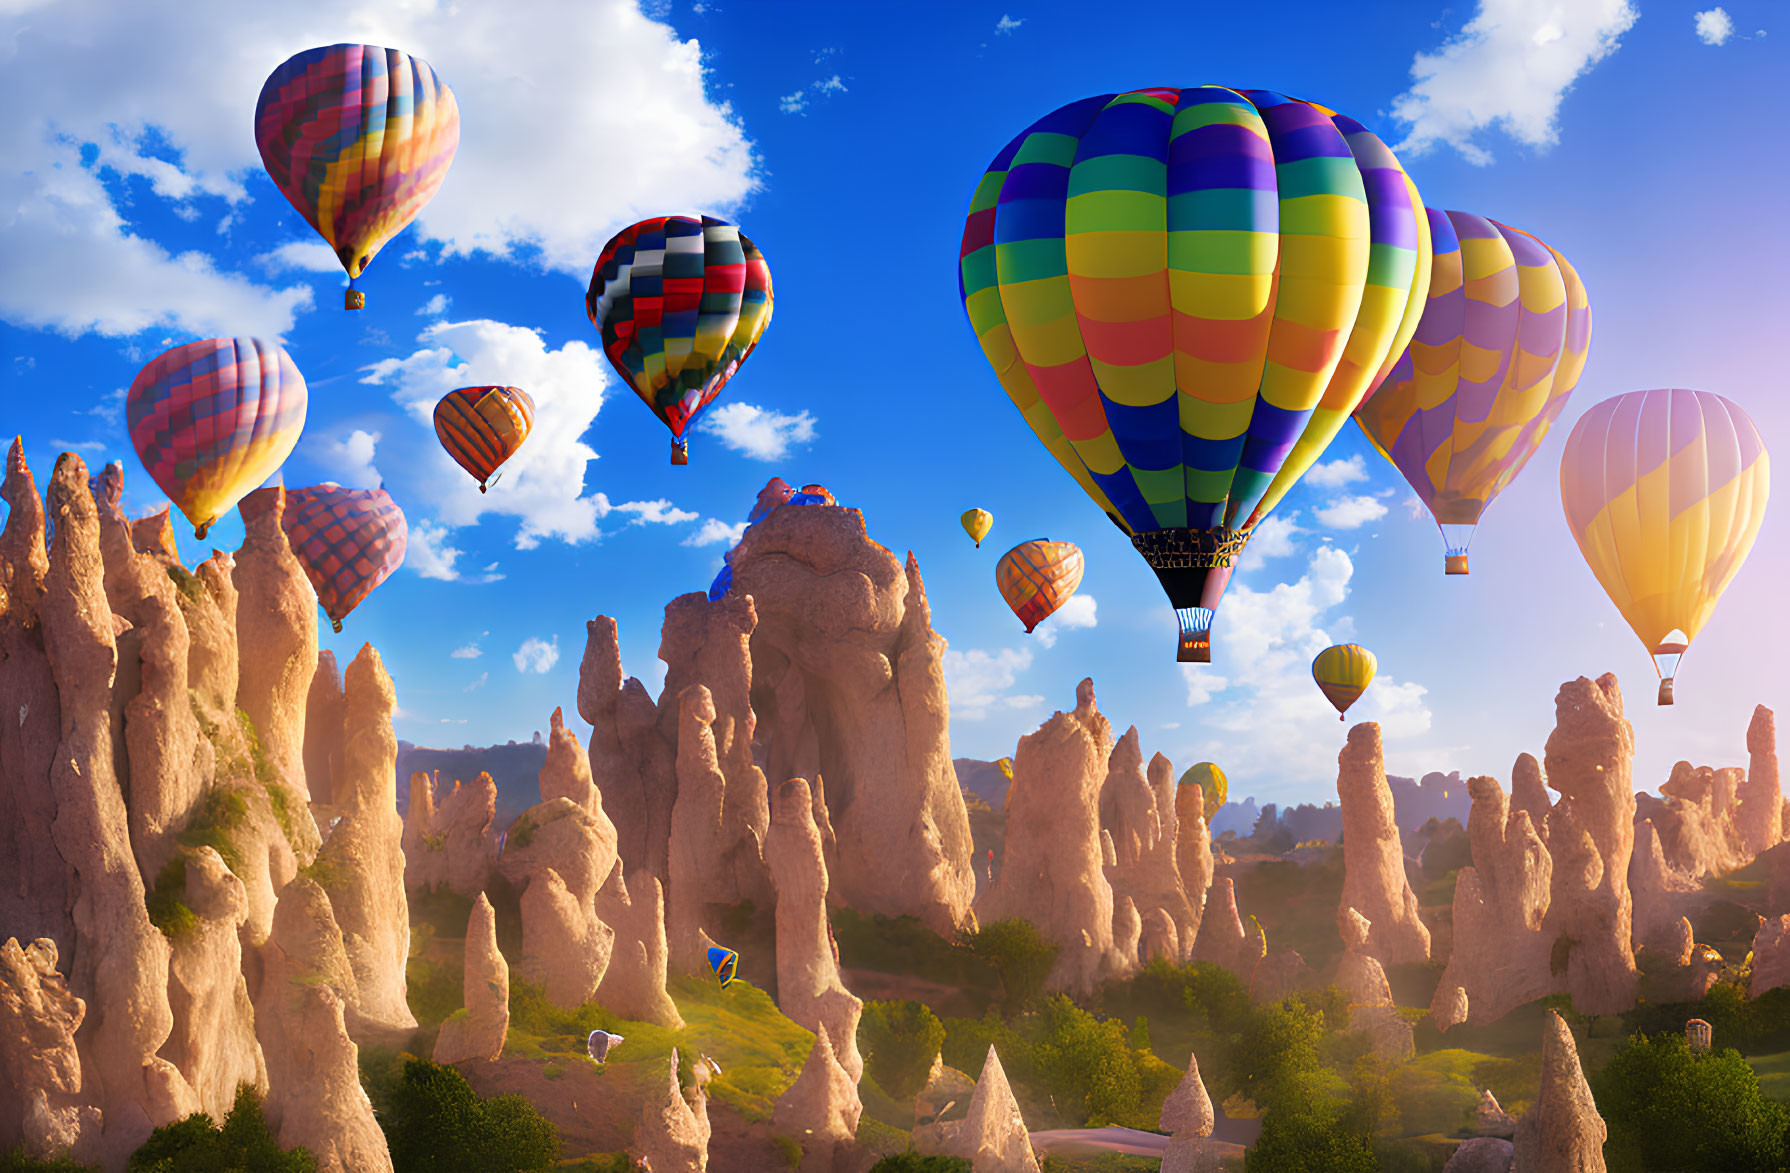 Vibrant hot air balloons soar above rocky spires in blue sky